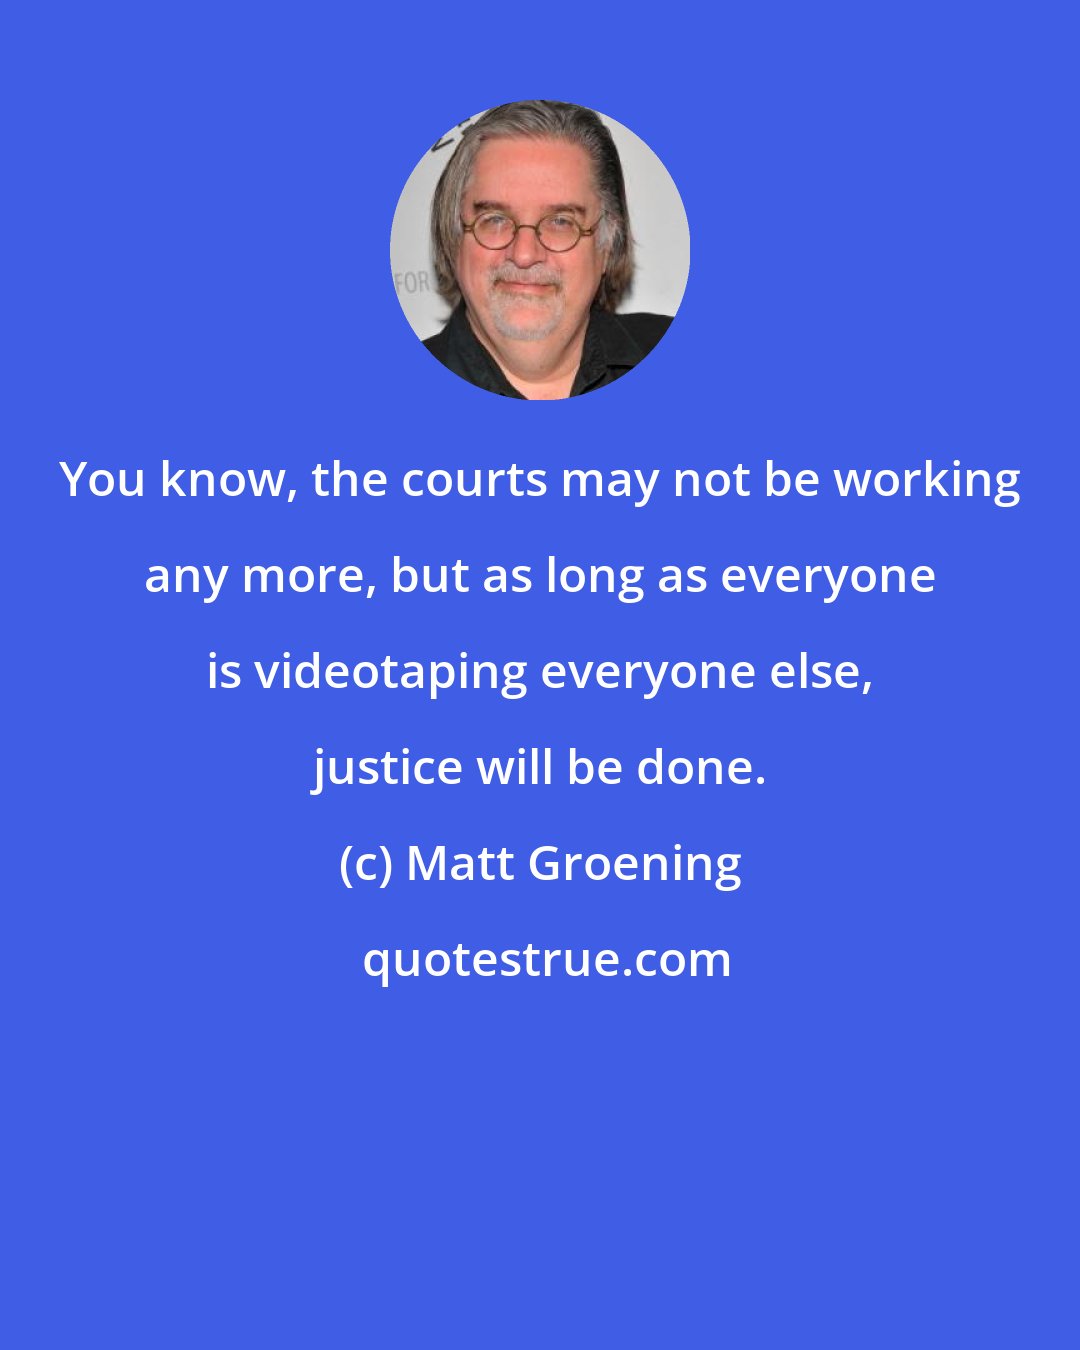 Matt Groening: You know, the courts may not be working any more, but as long as everyone is videotaping everyone else, justice will be done.